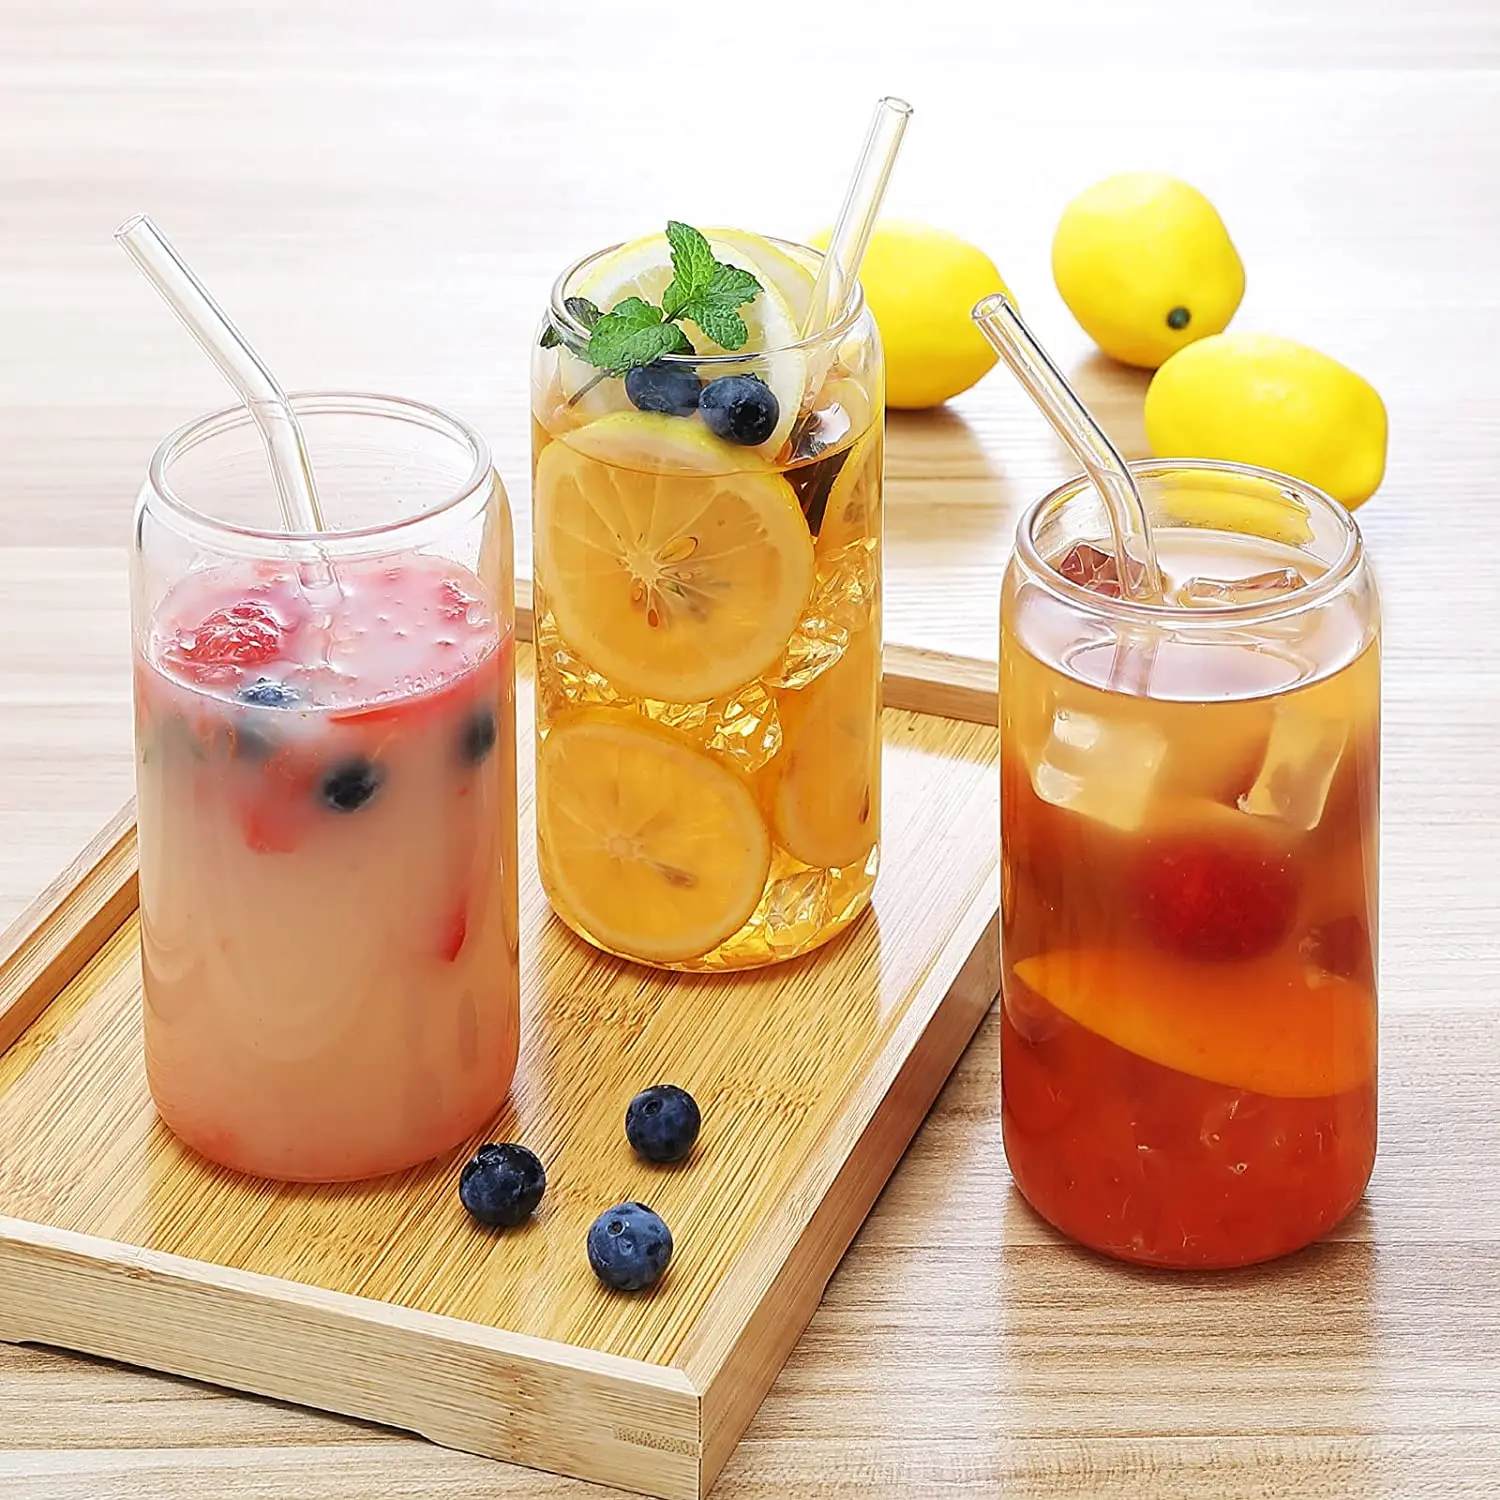 https://ae01.alicdn.com/kf/S432ac6a97598405e9661548aa16cd61be/360-480ml-4Pcs-Glass-Cup-With-Lids-and-Straws-Reusable-Coke-Cup-Glasses-for-Juice-Beer.jpg